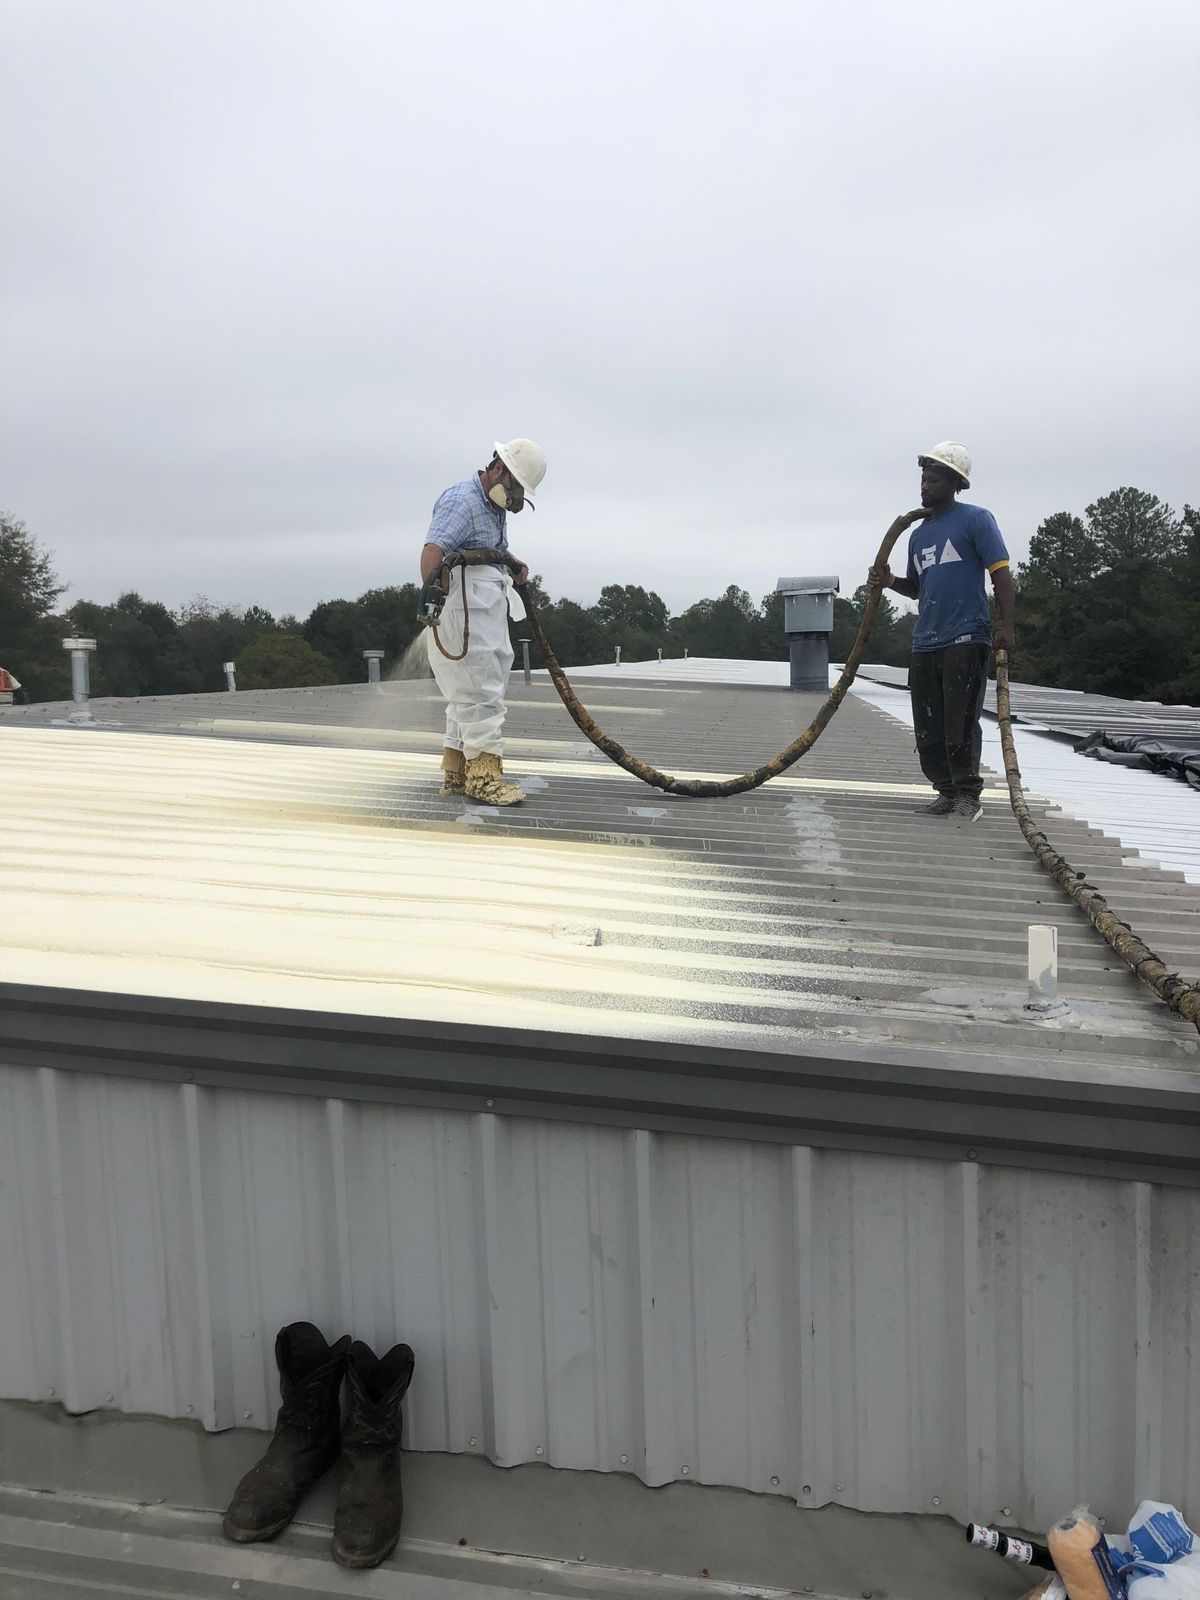 Local Commercial Roofing Experts